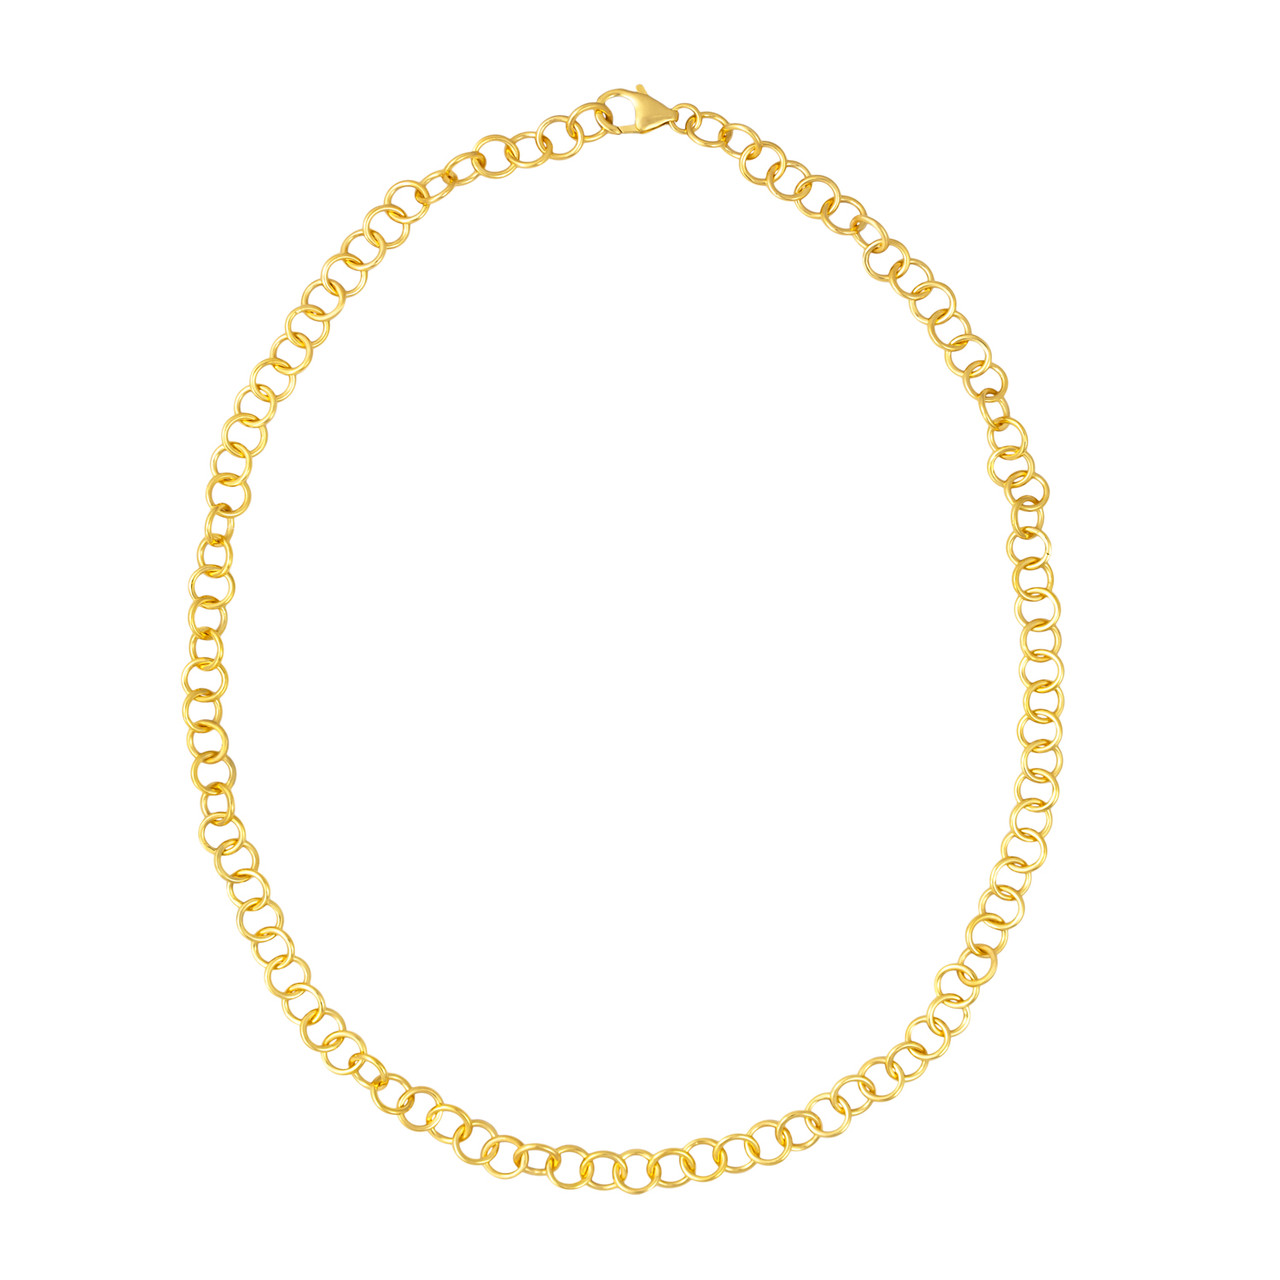 Tomfoolery: Curve Circle Chain Necklace, Everyday by tomfoolery